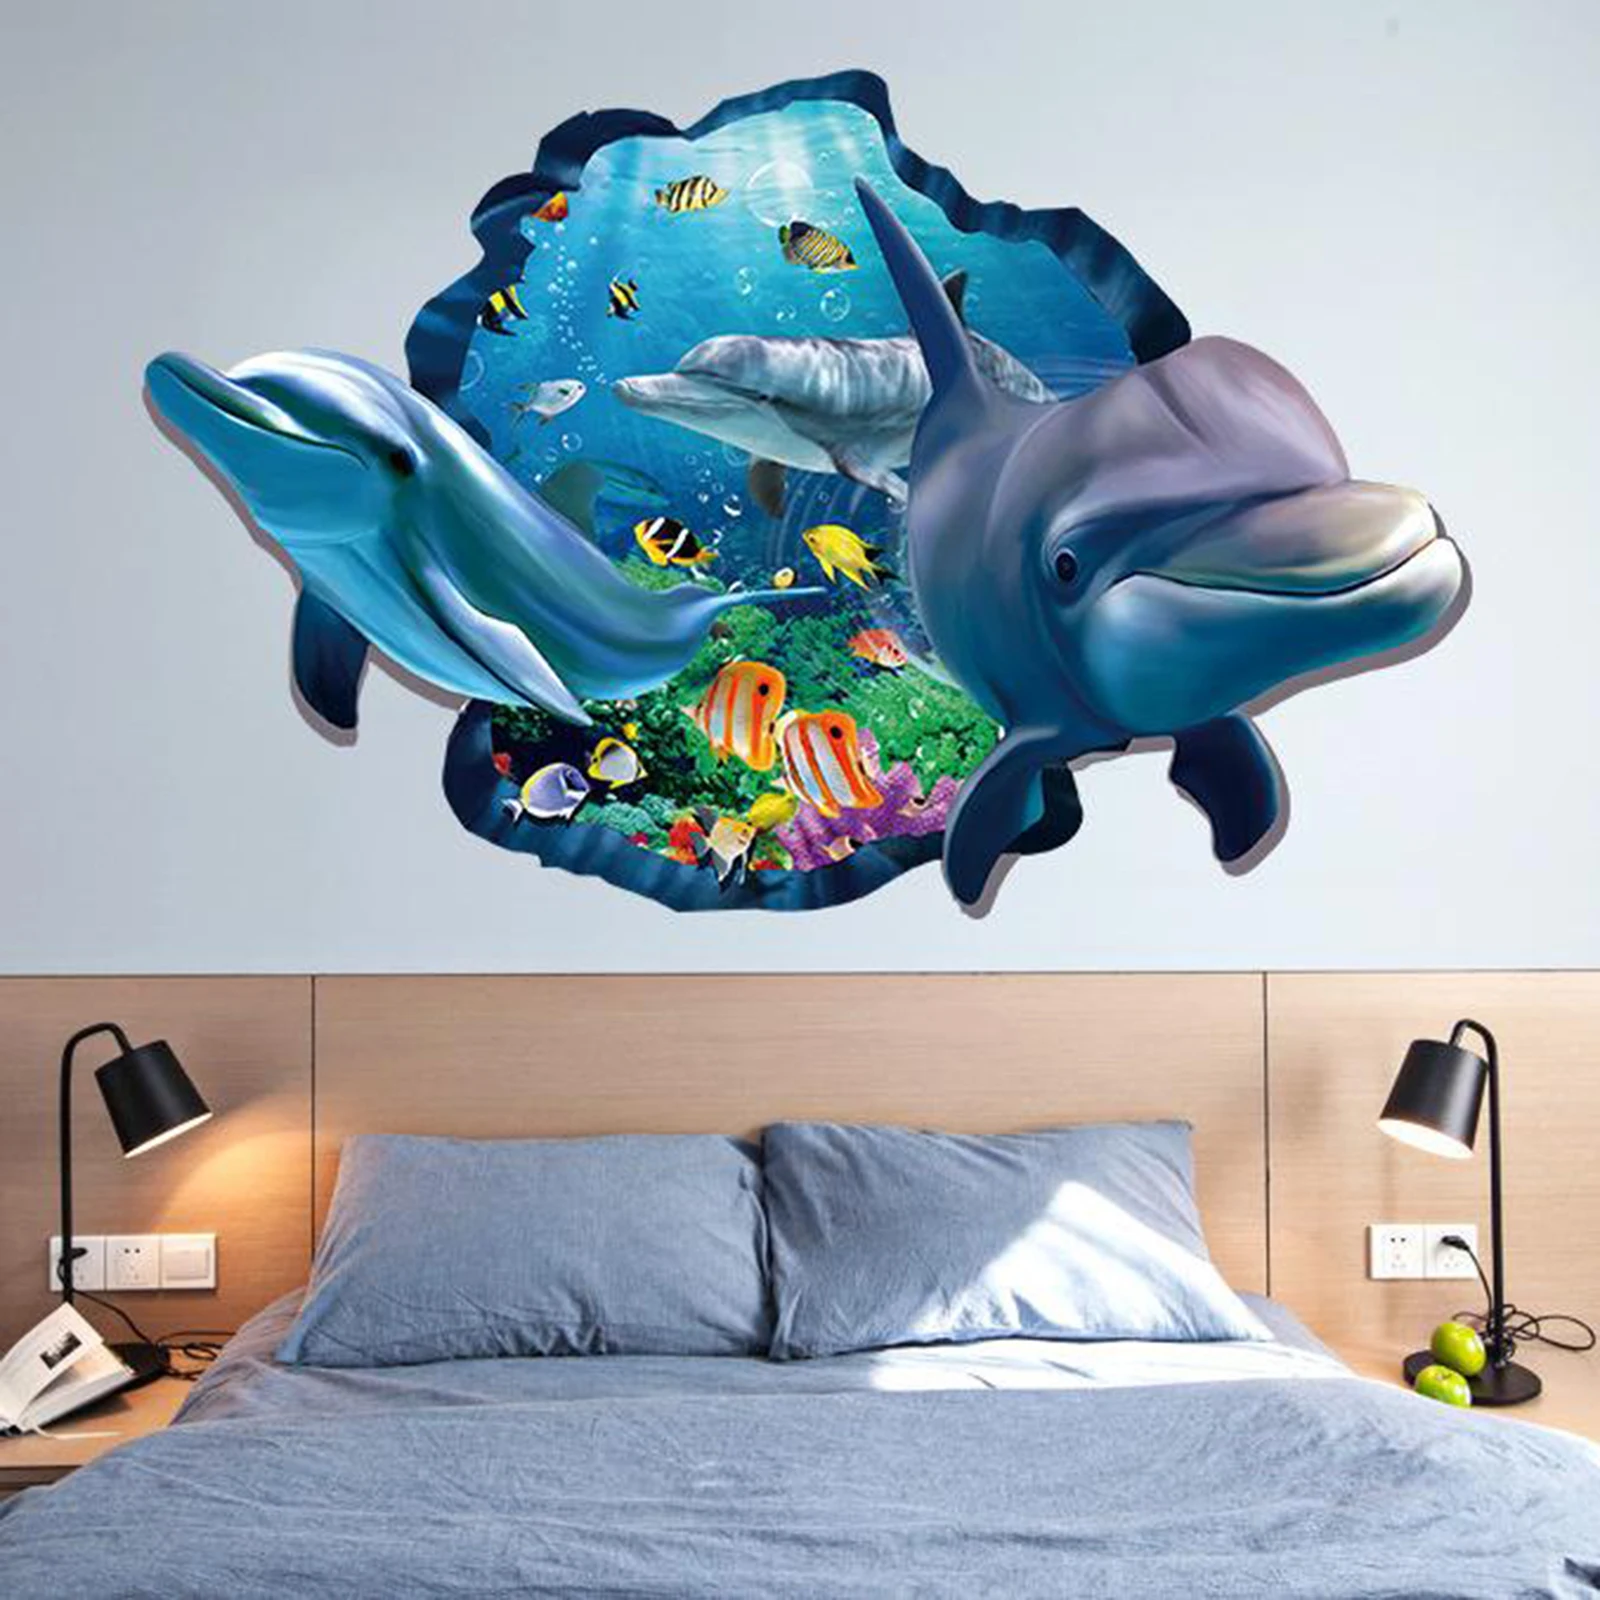 3D Wall Mural Sticker, DIY Vinyl Self-Adhesive Removable Wall Mural Stickers Wallpaper Waterproof Wall Mural for Interior Home